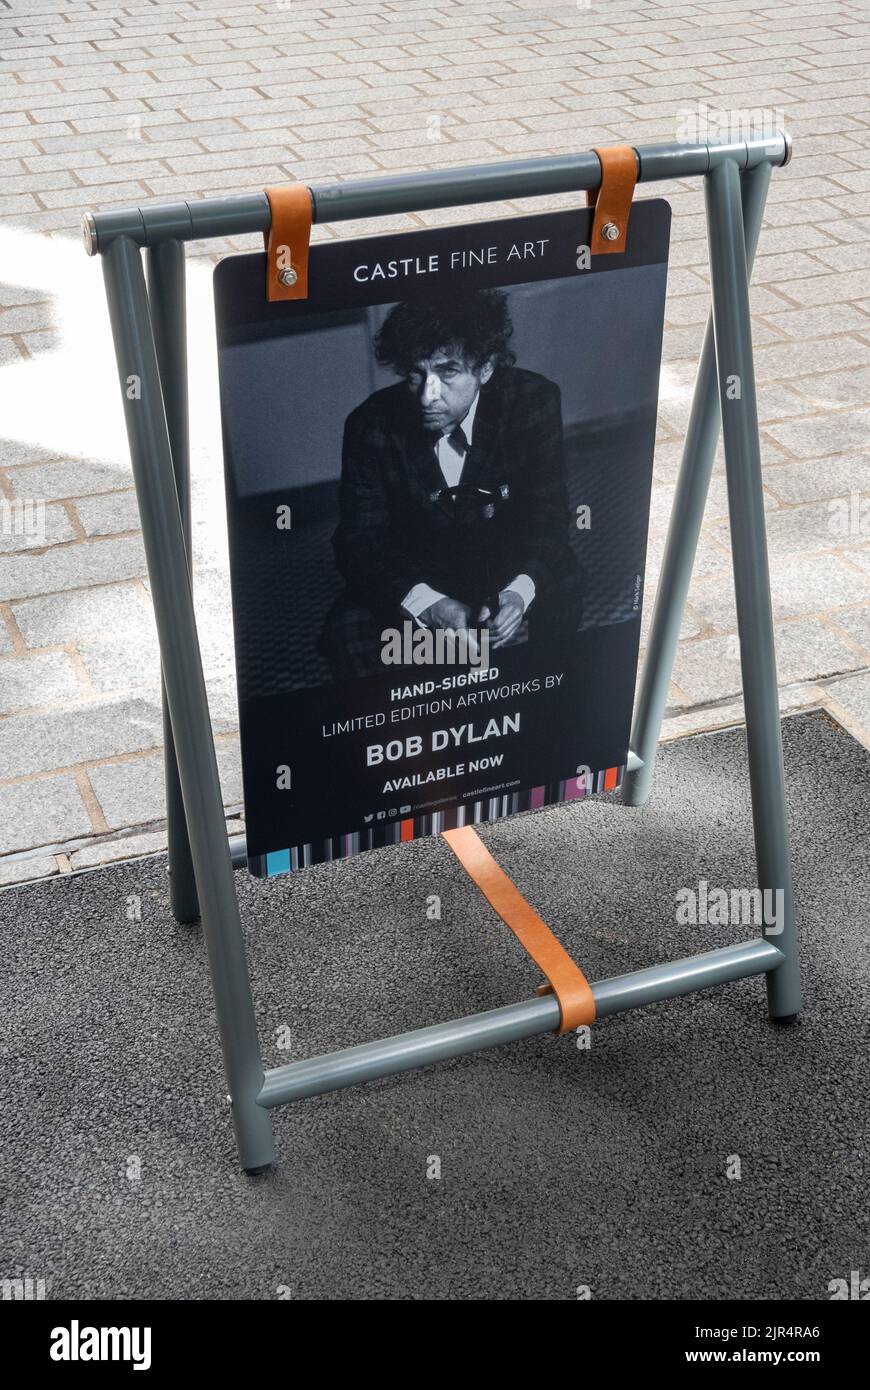 Hanging sign announcing Bob Dylan's art outside Castle Fine Art Gallery in Liverpool Stock Photo